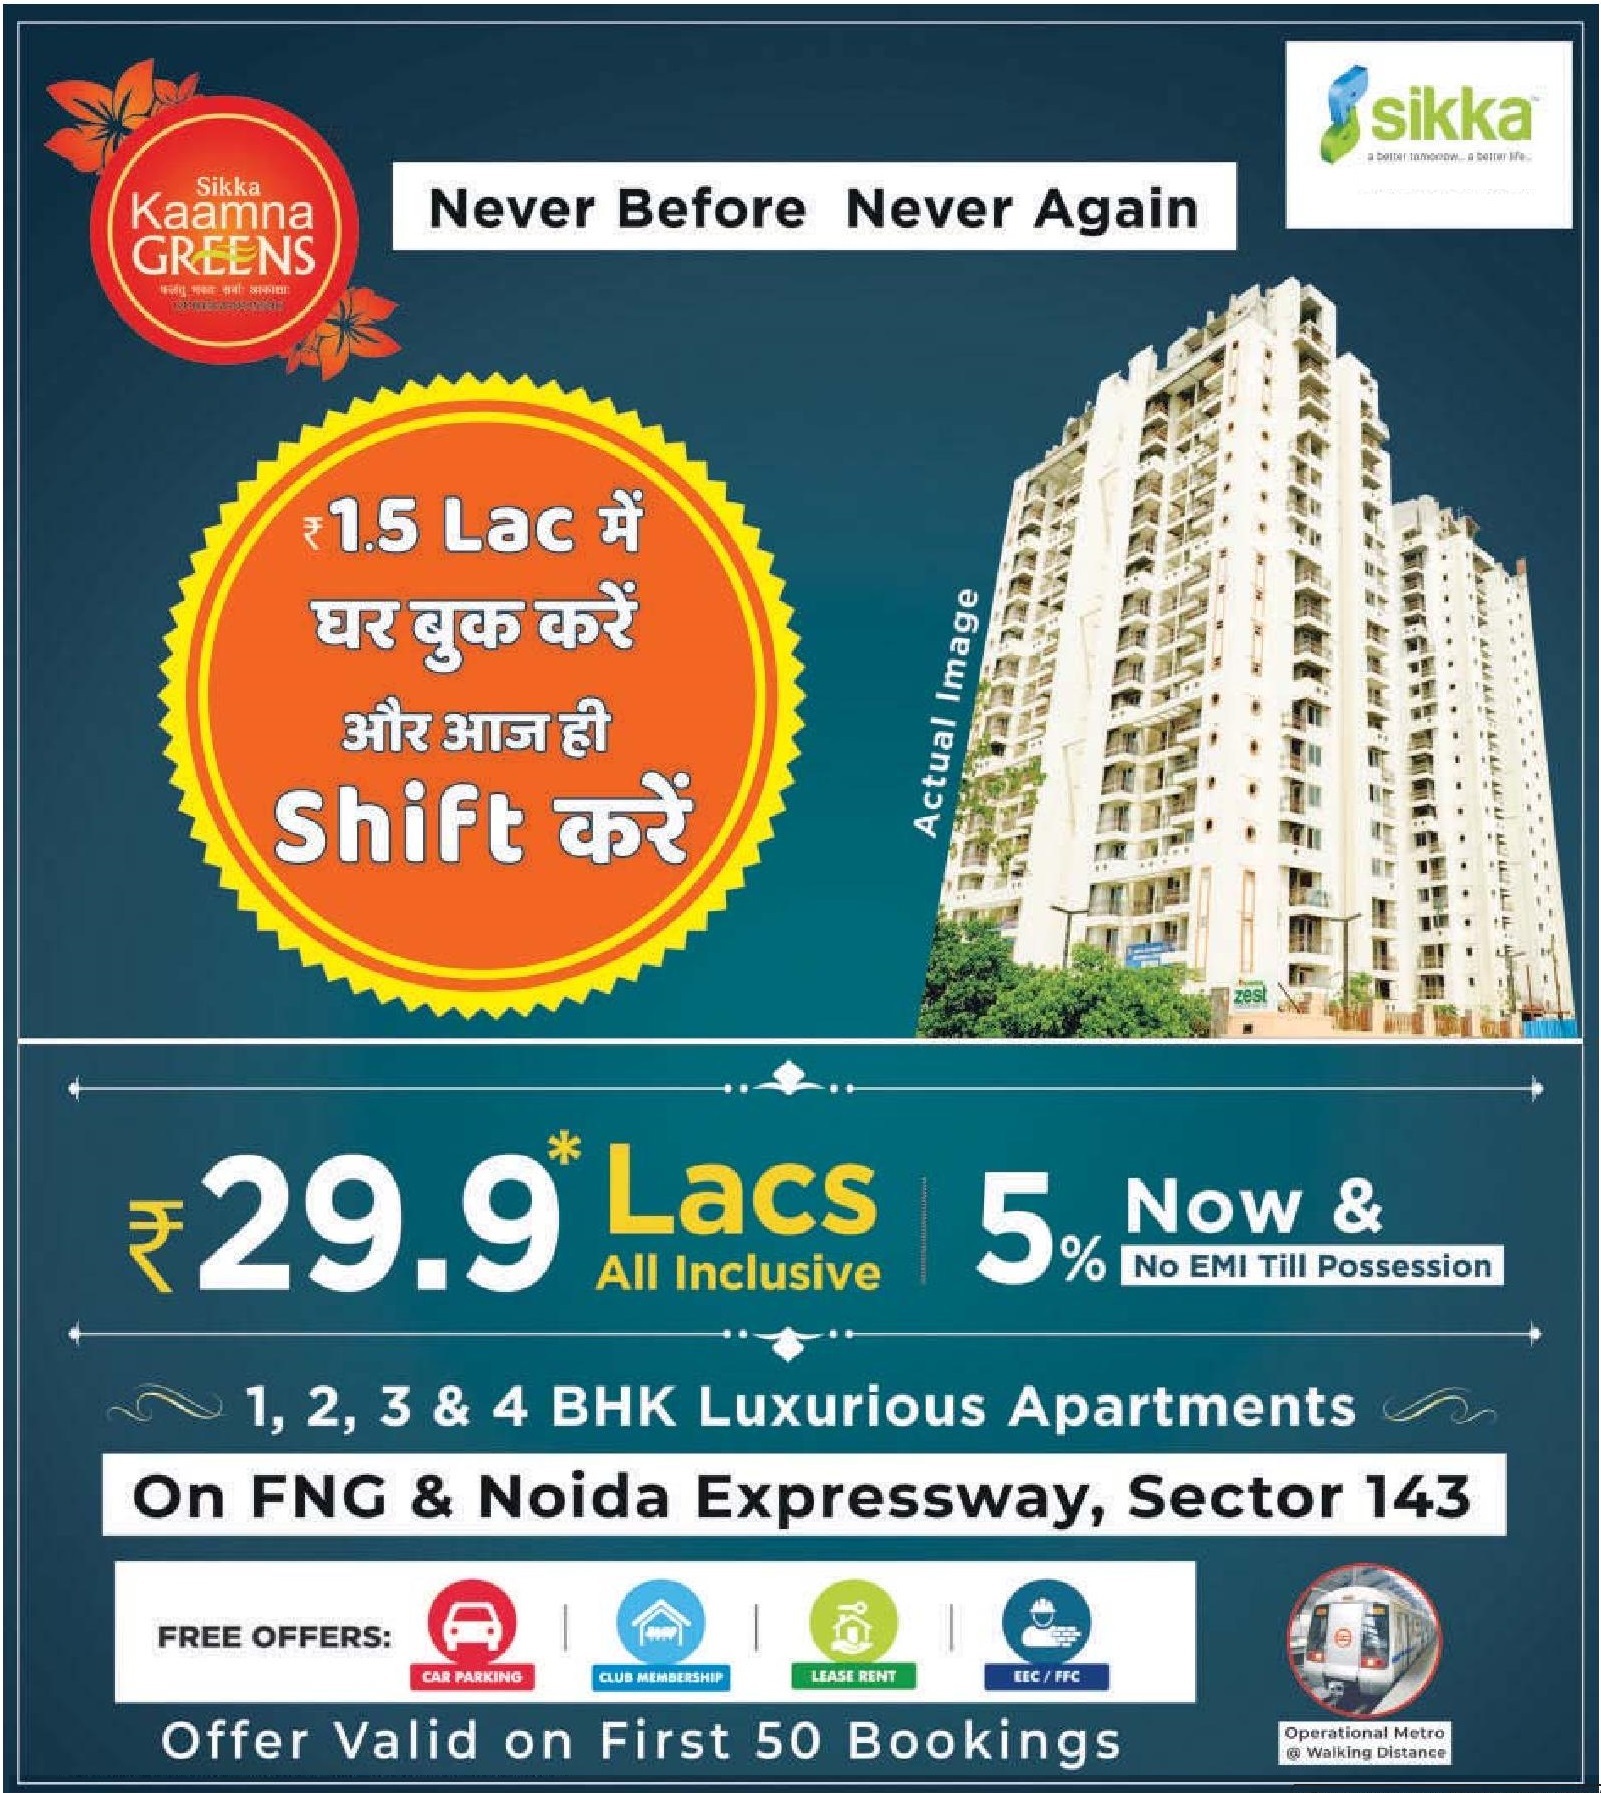 Book 1, 2, 3, 4 bhk luxurious apartments at Sikka Kaamna Greens in Noida